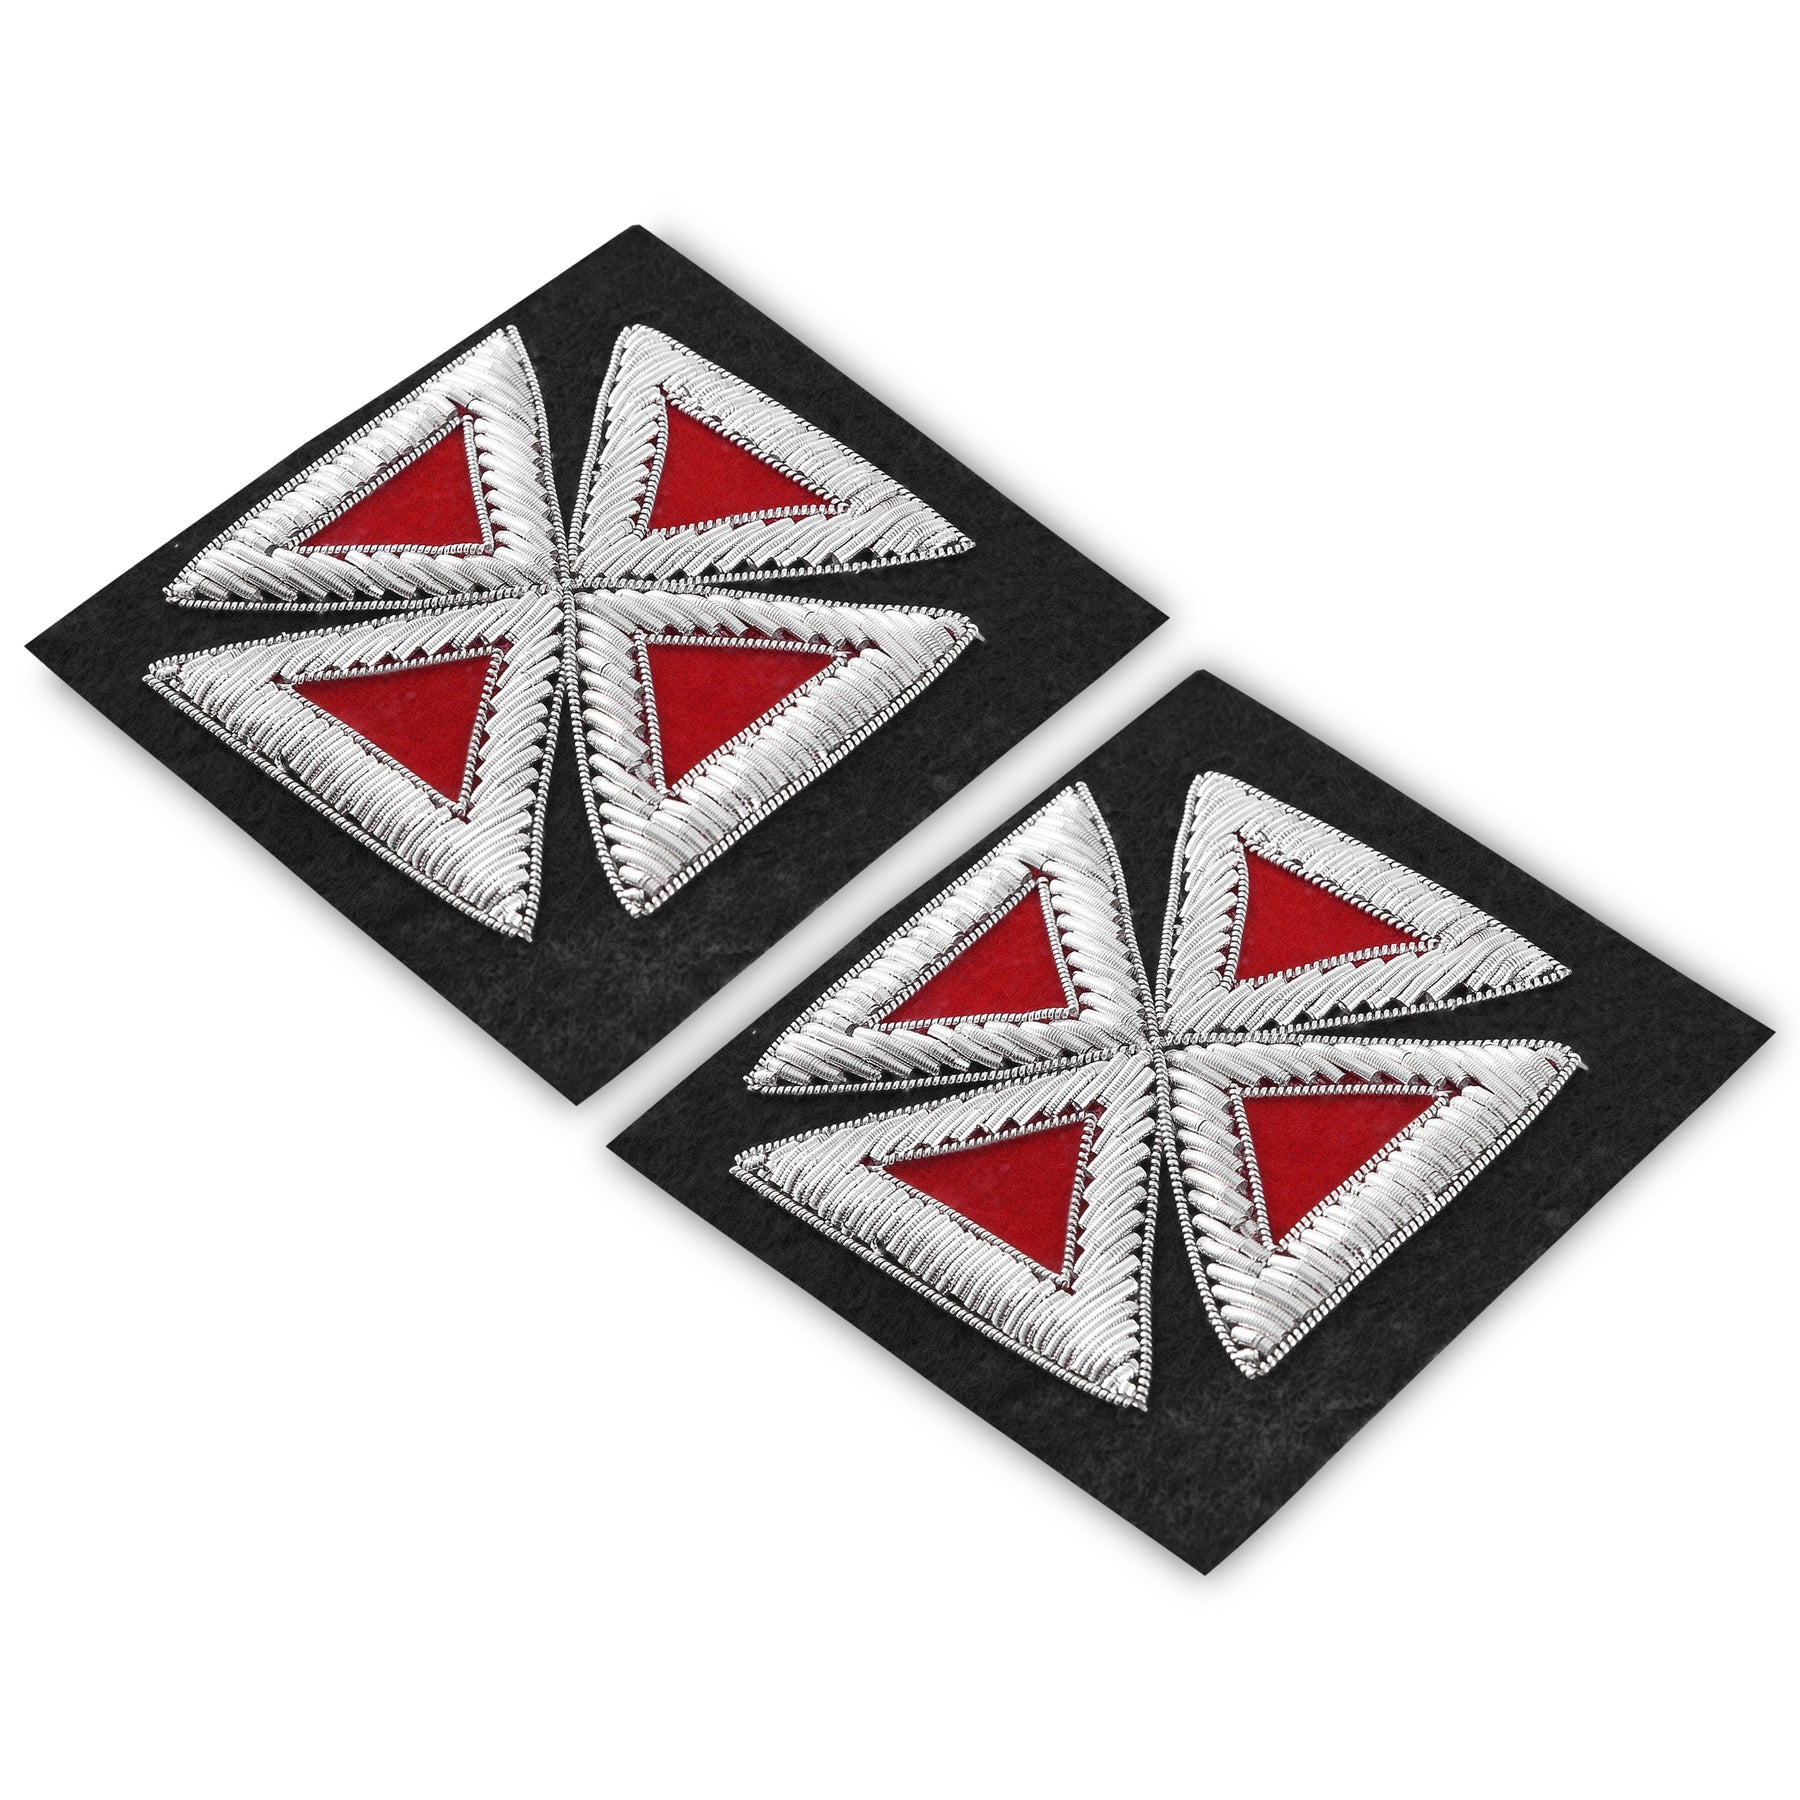 Past Grand Master Knights Templar Commandery Patch - Embroidered Black & Red - Bricks Masons